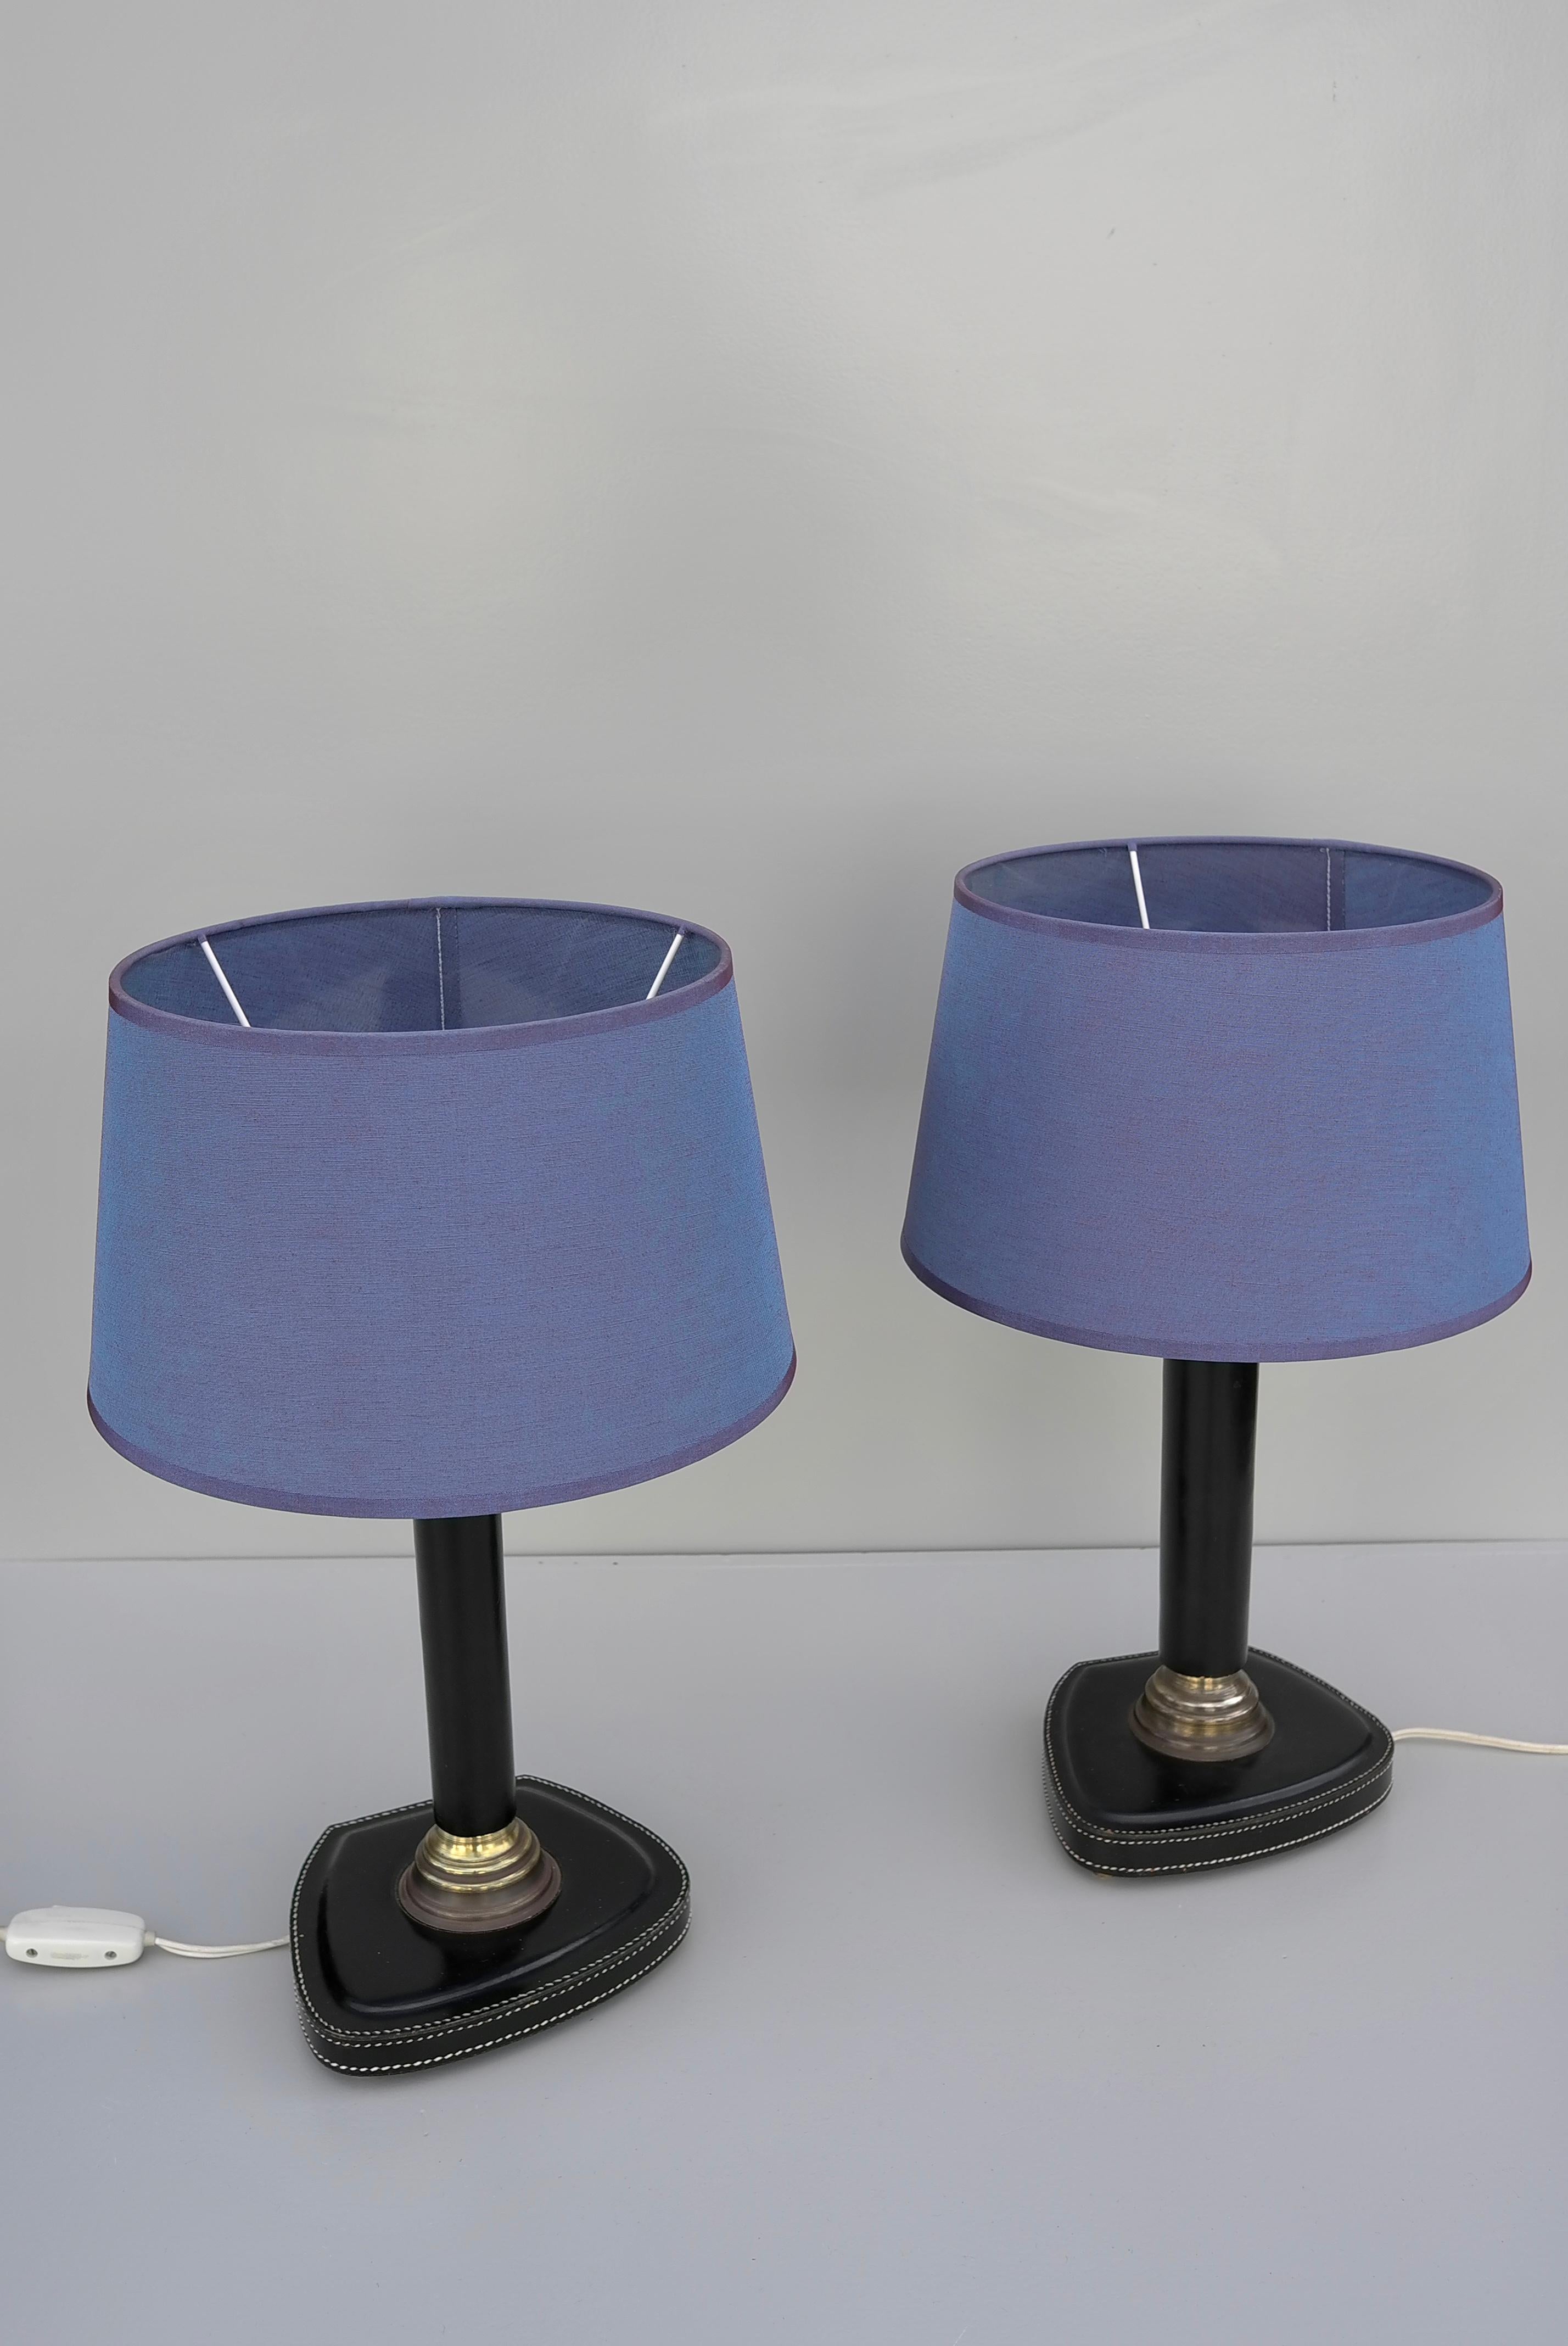 20th Century Pair of Hand-Stitched Black Leather Table Lamps, France, 1960s For Sale